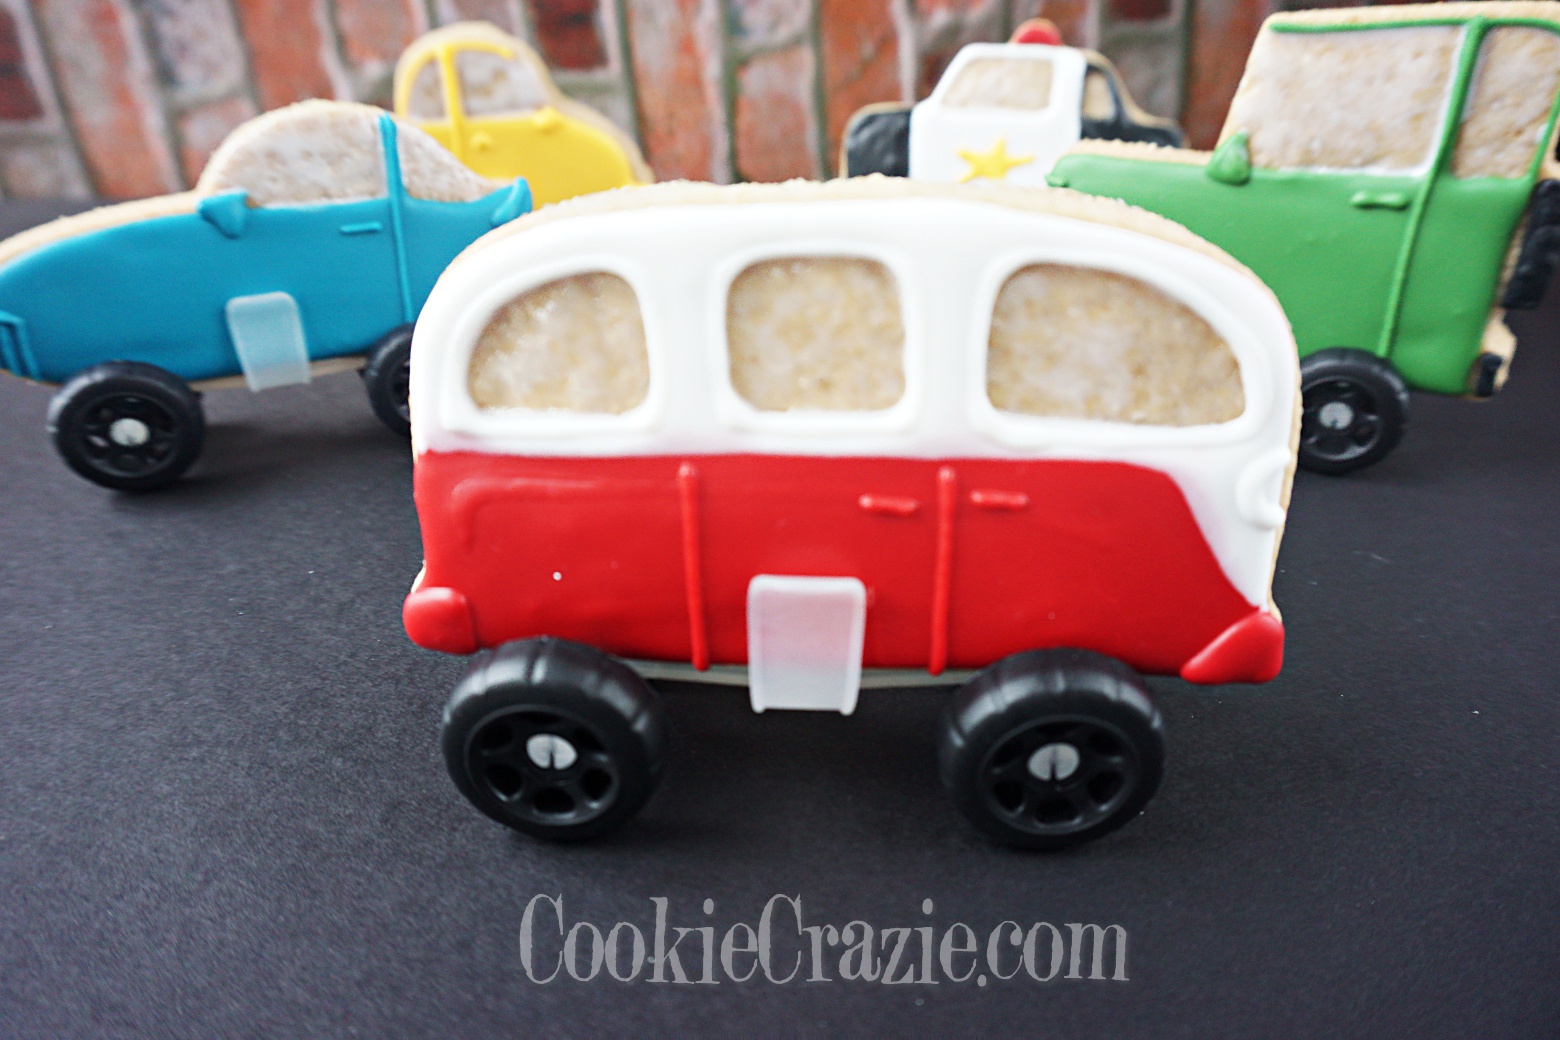  Finn’s VW Bus Decorated Sugar Cookie YouTube video  HERE  